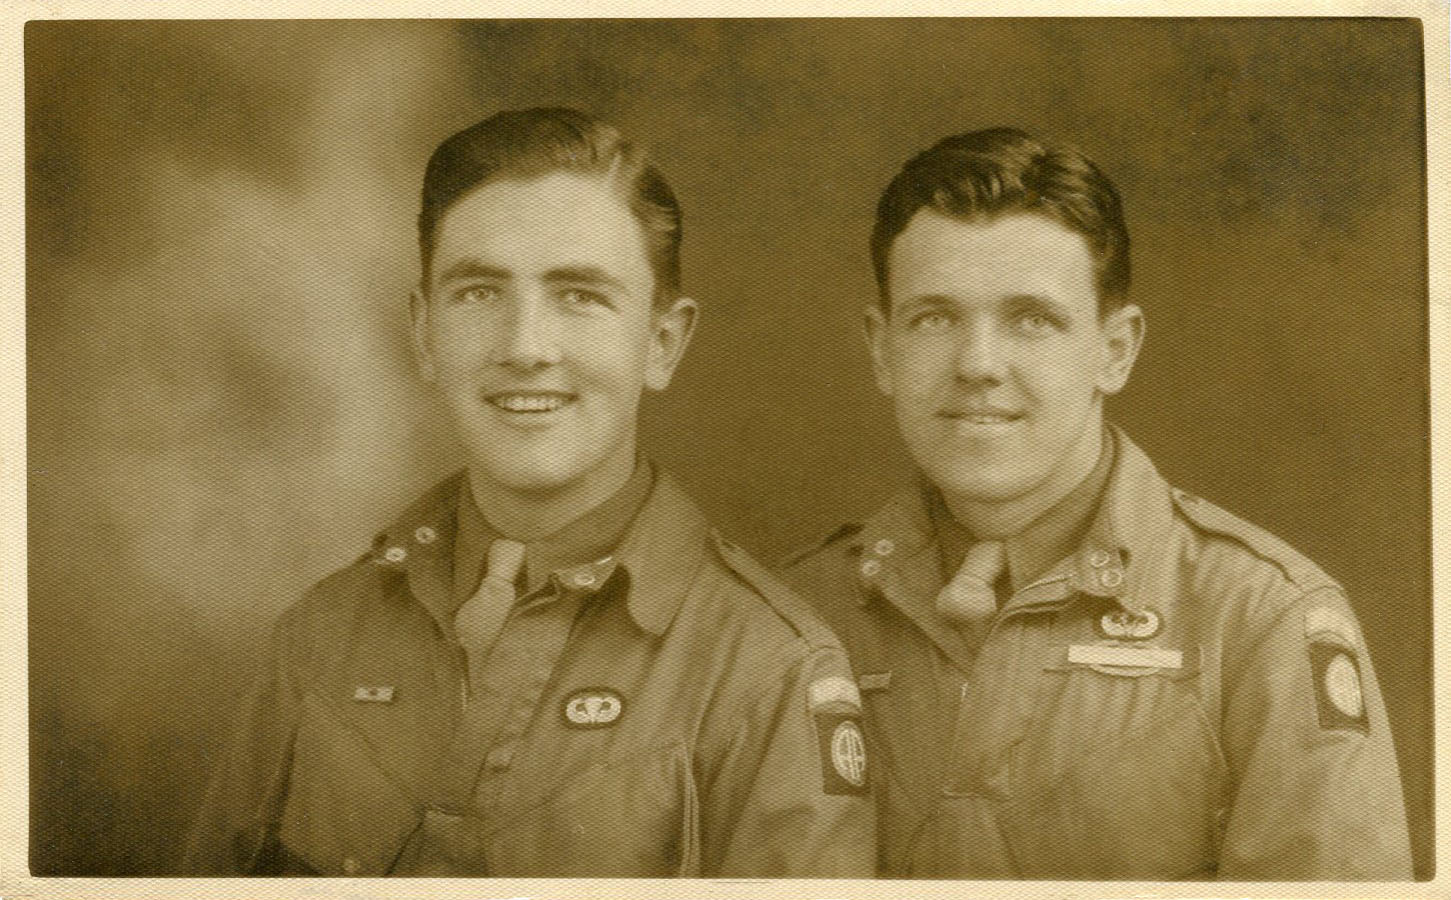 Floyd Helmick (101st) and John Diffin